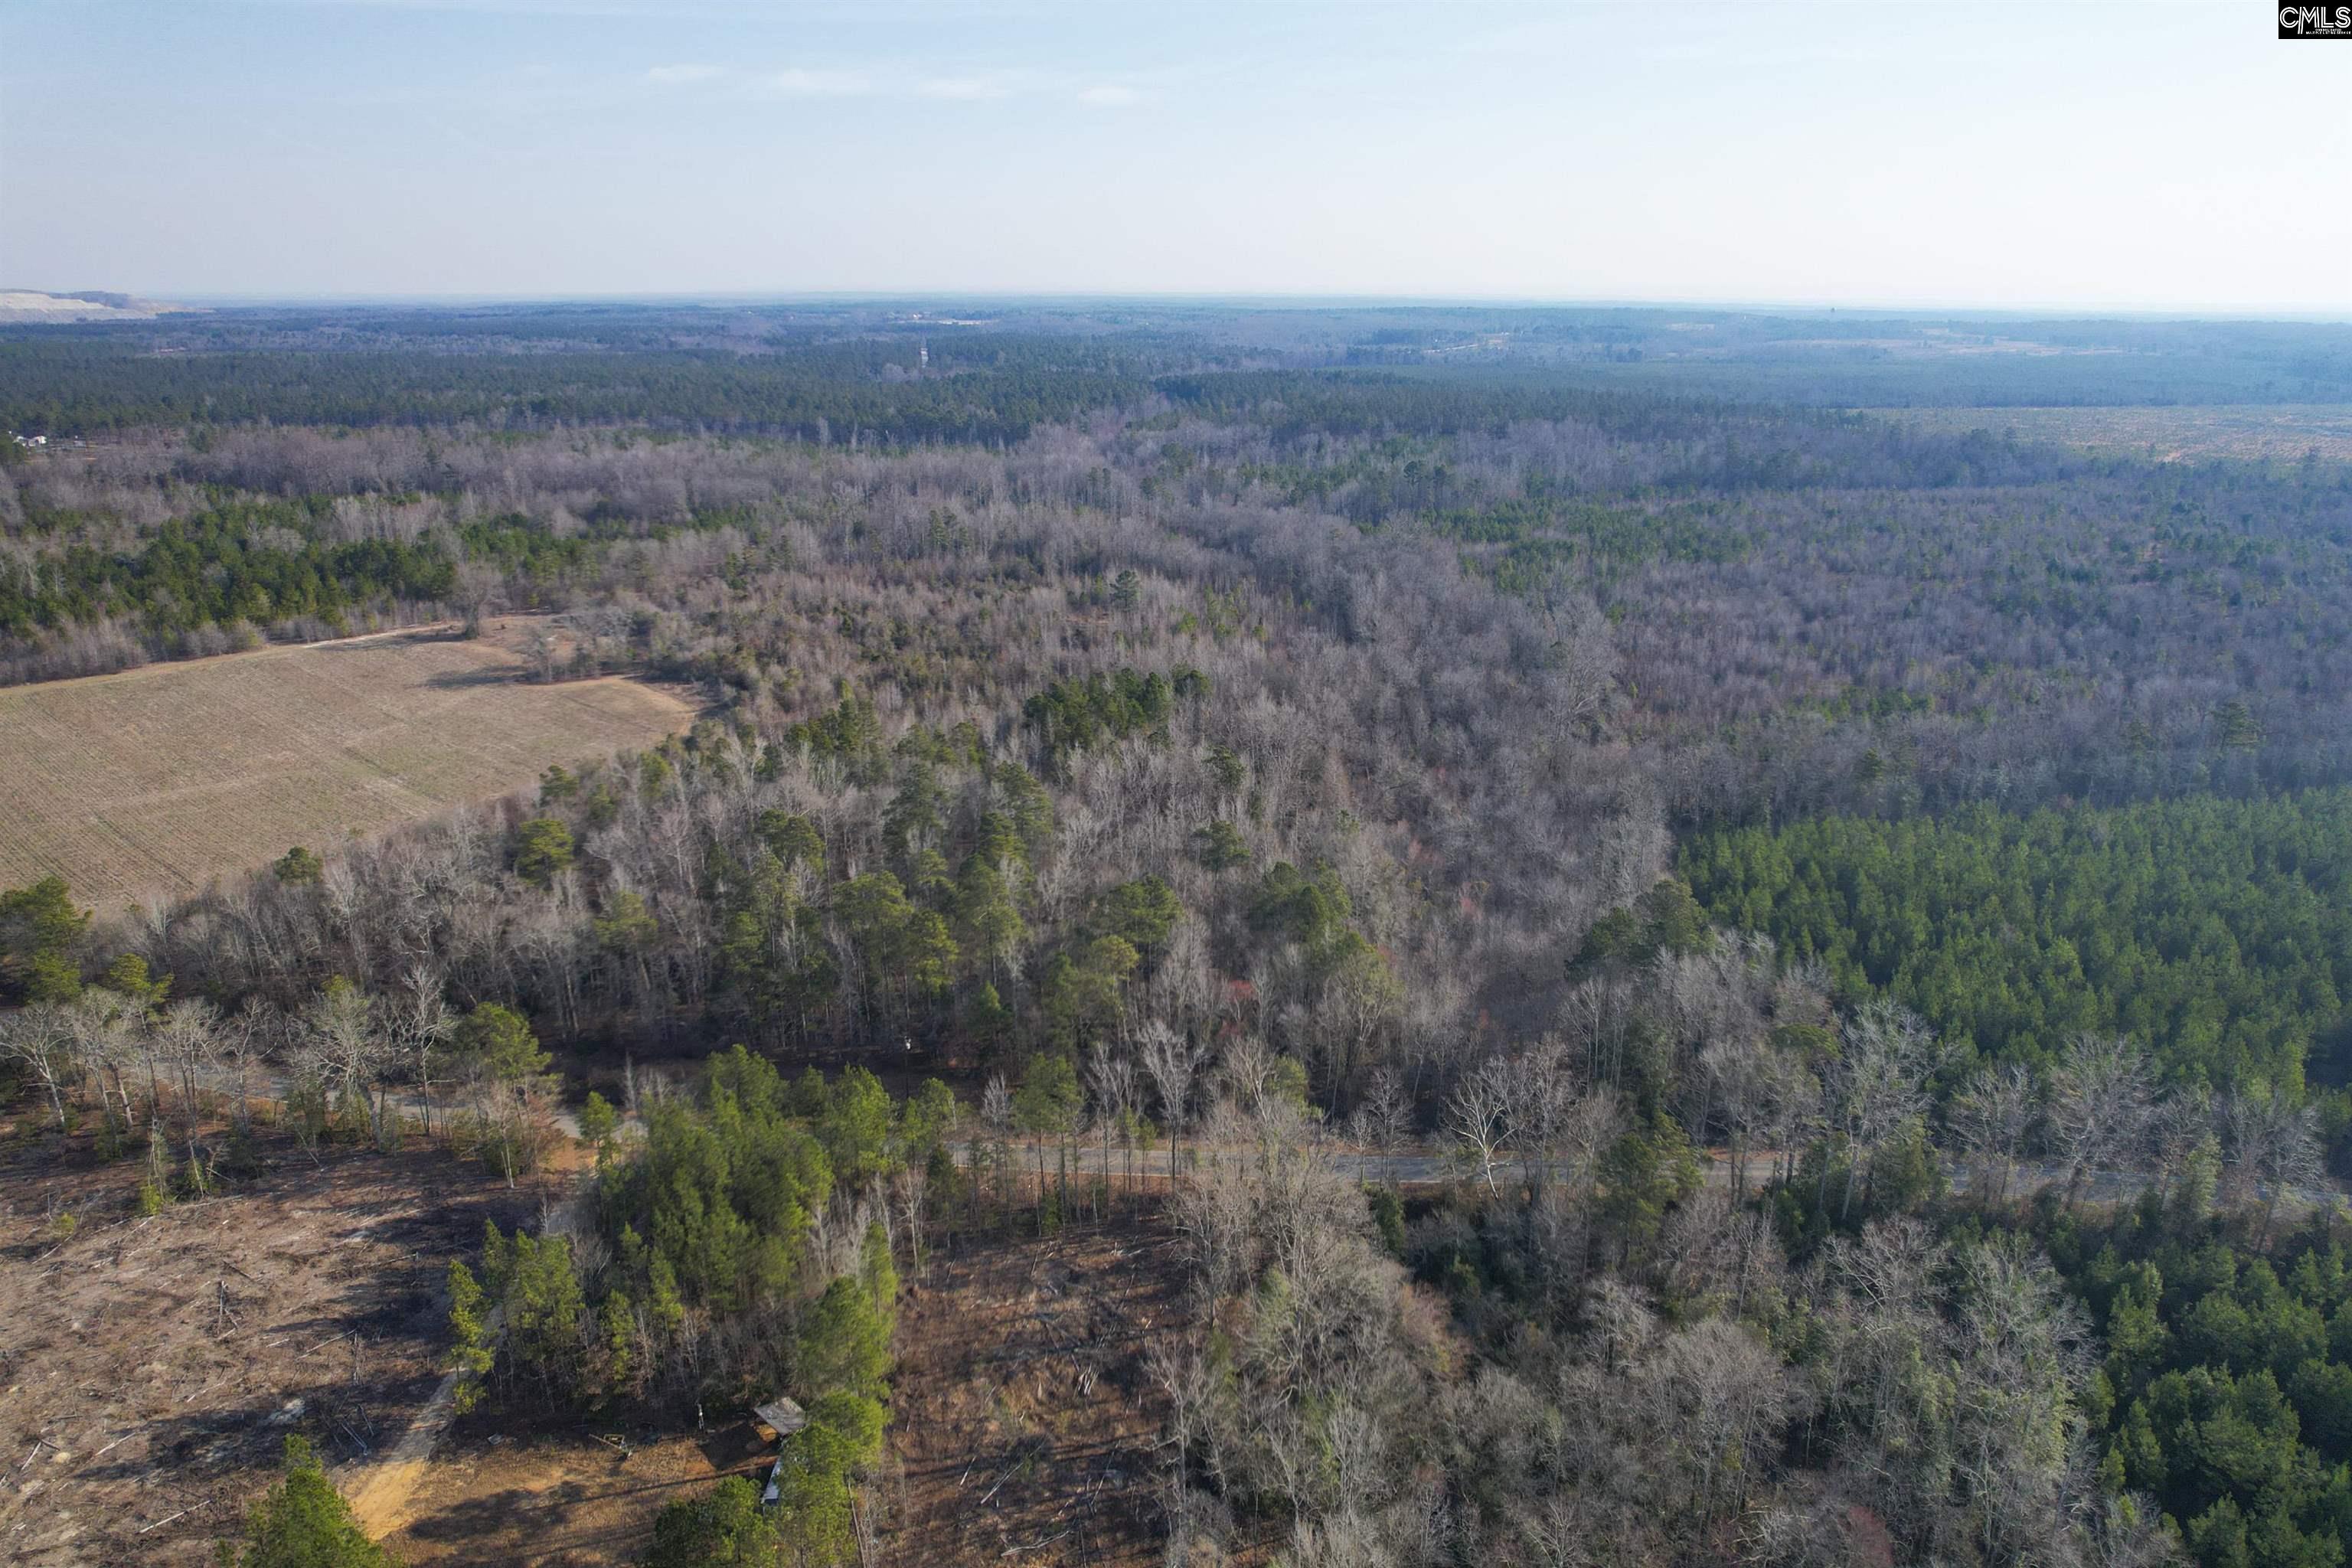  Lots For Sale - 703 Neds Creek, Kershaw, SC - 8 